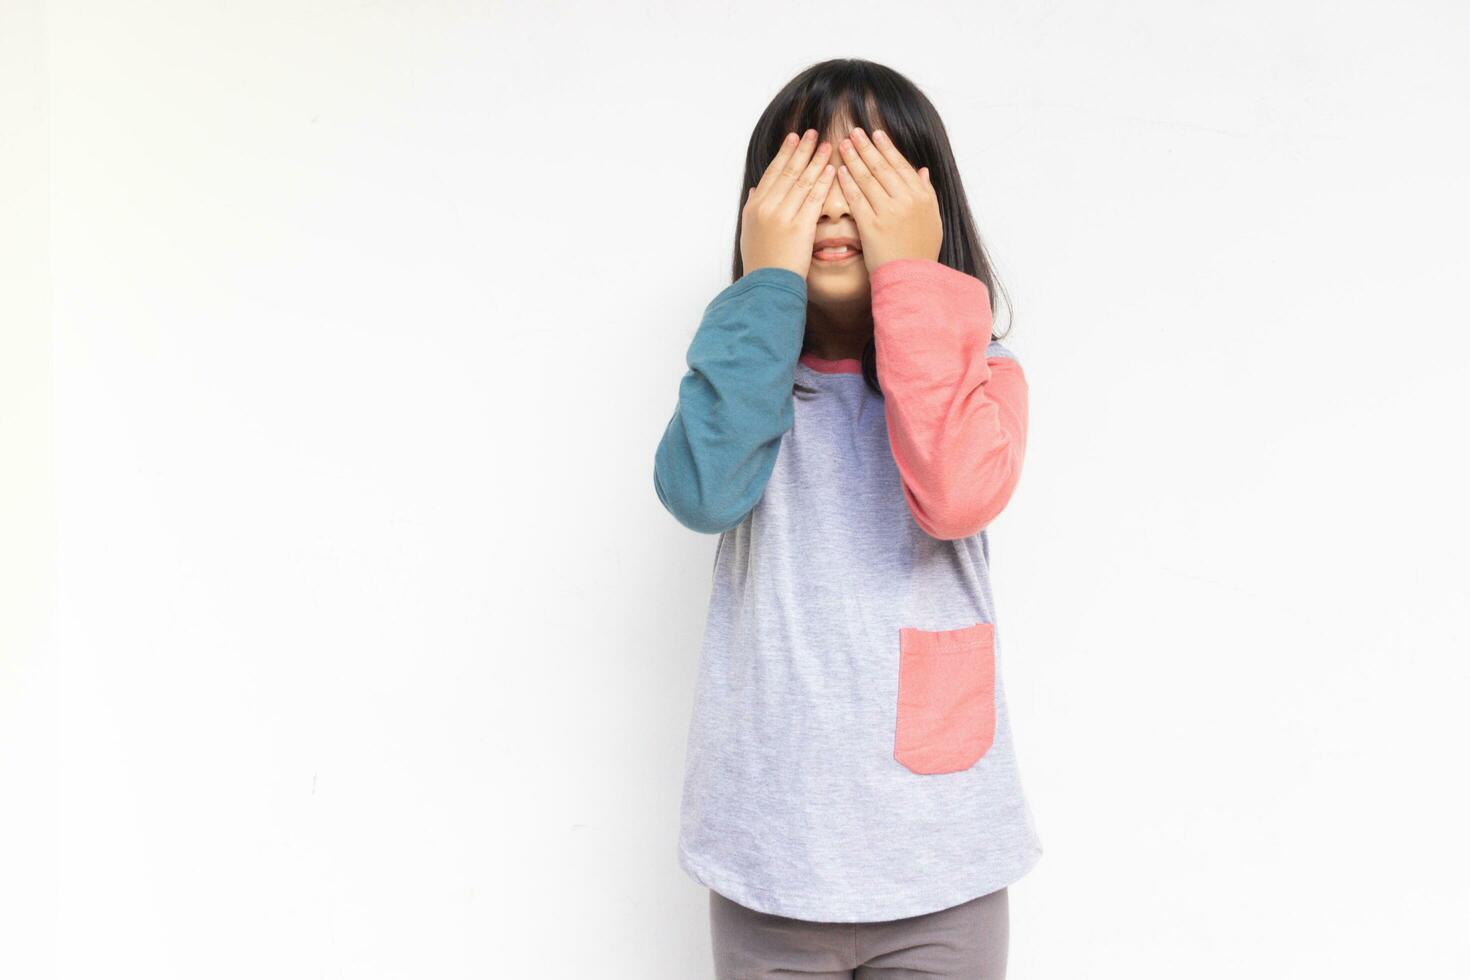 A cute smiling girl covering his eyes, playing hide and seek photo